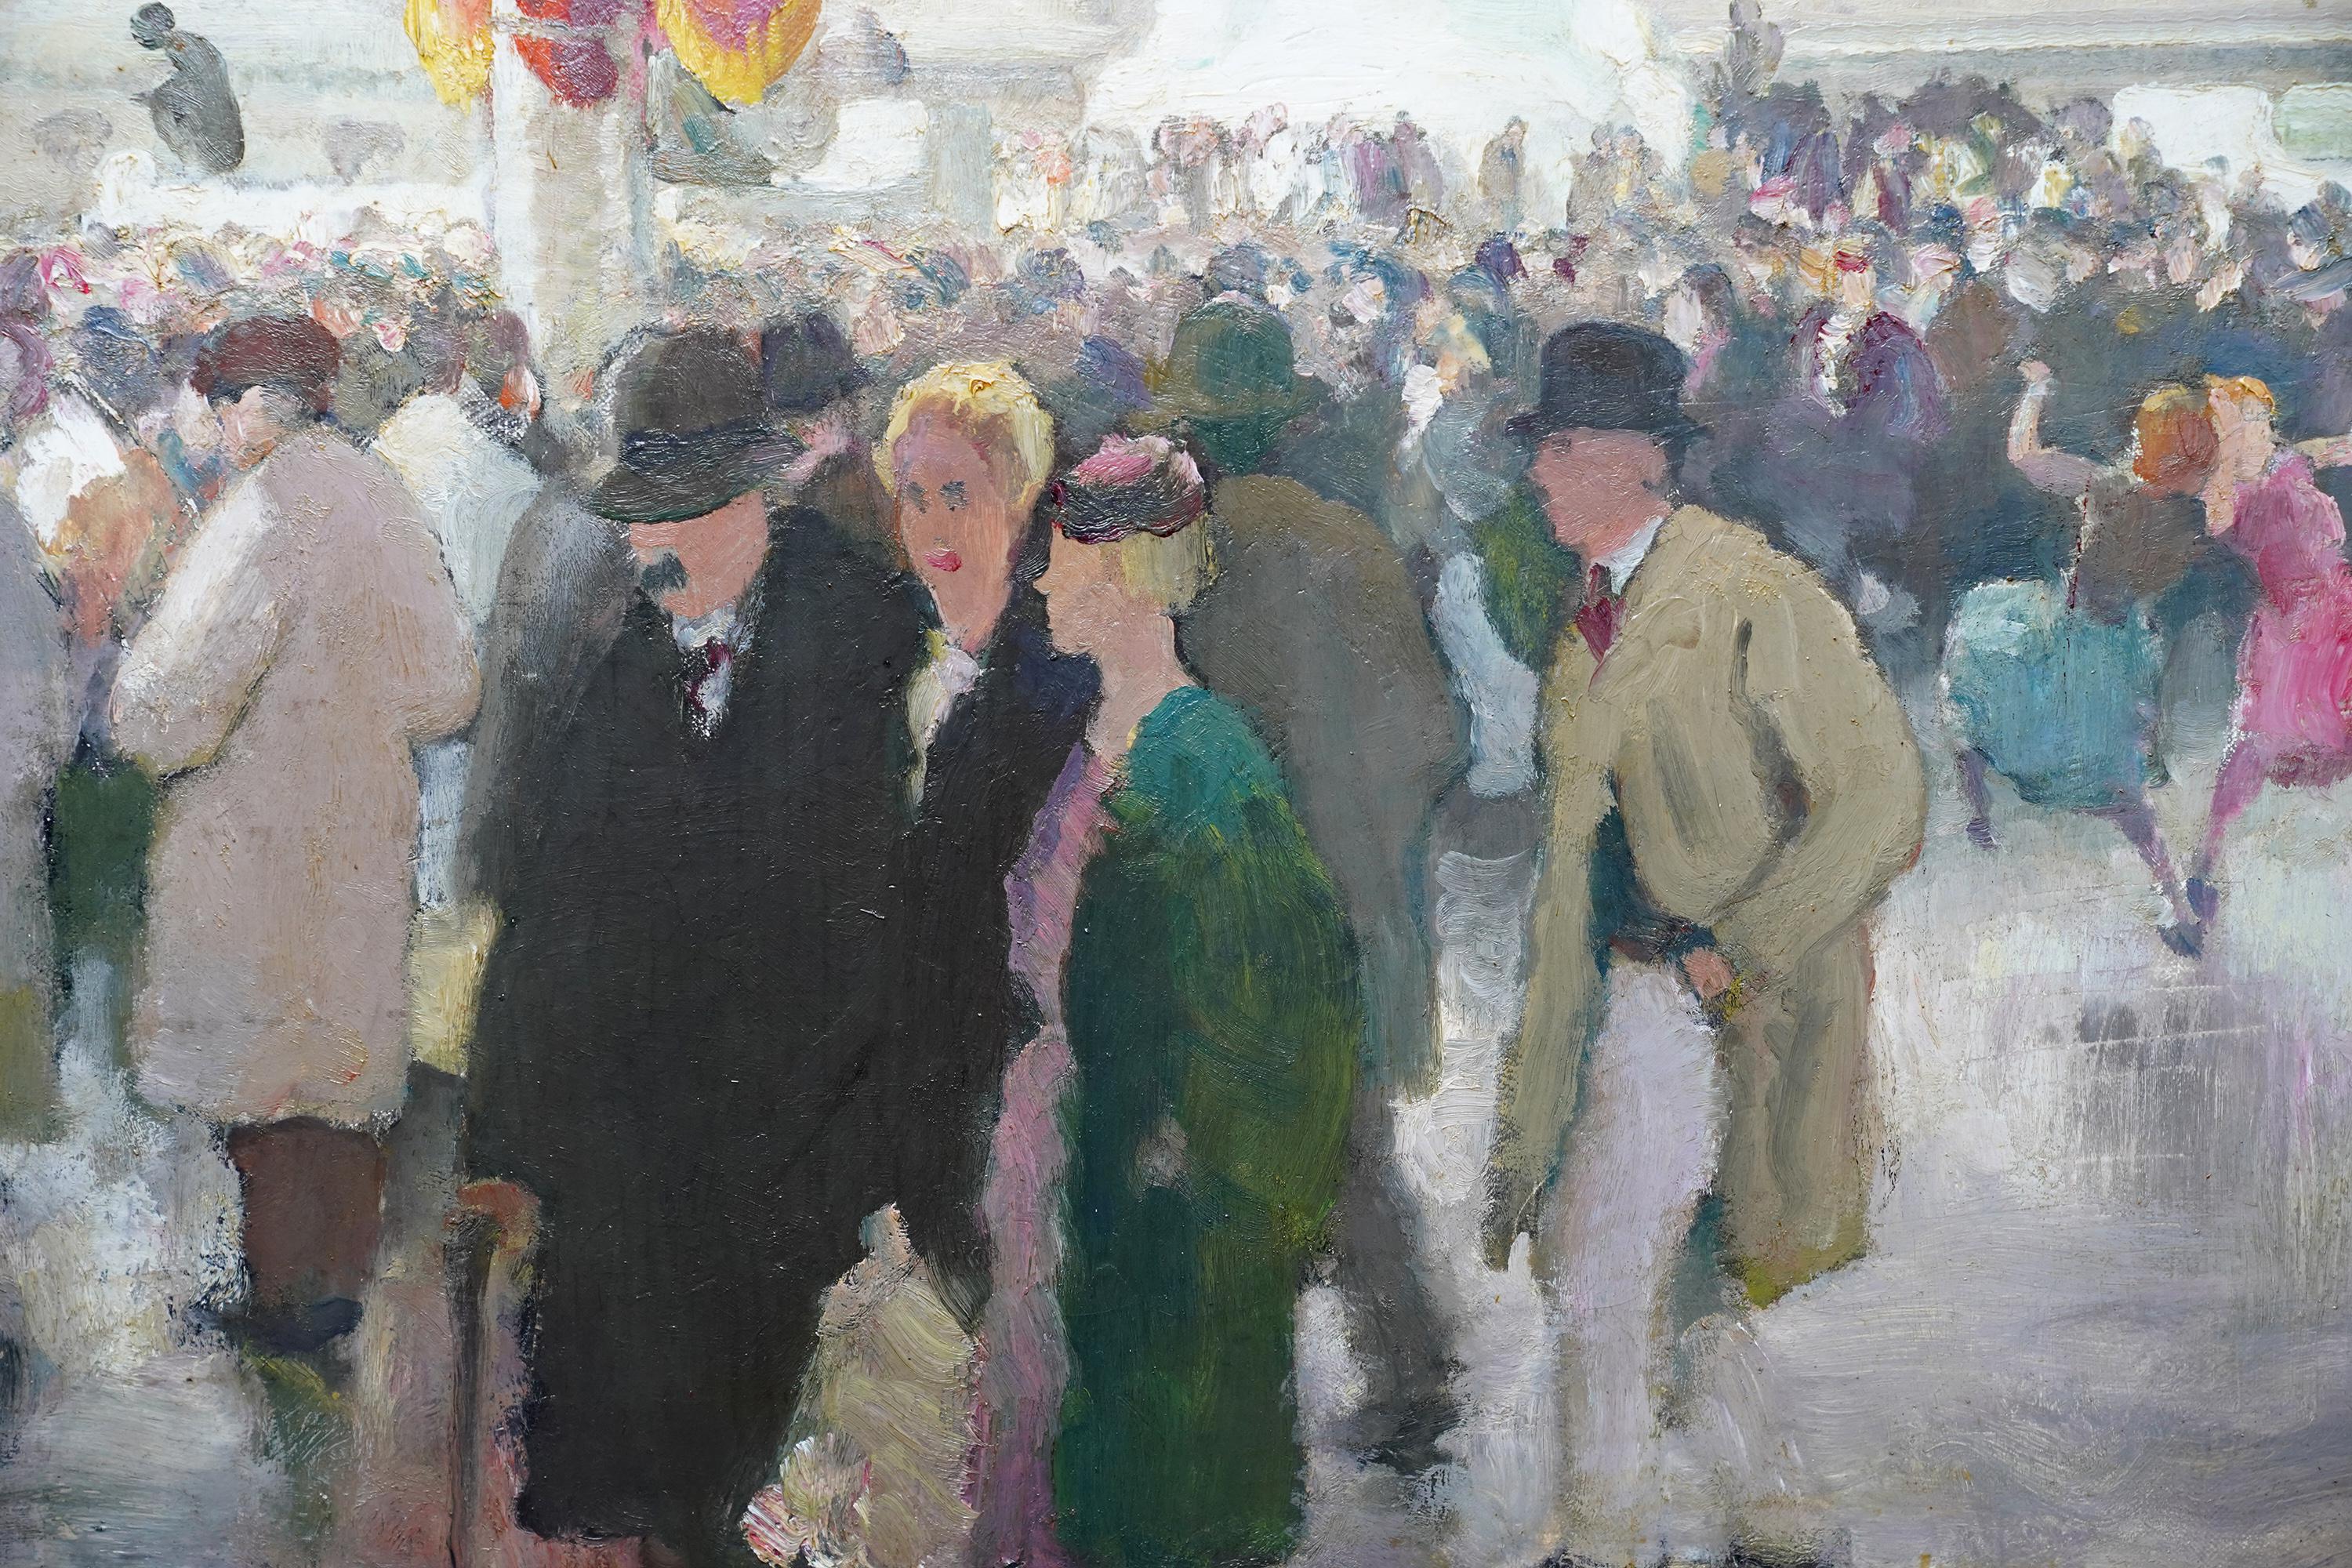 This superb British Post Impressionist figurative landscape oil painting is by war artist Gerald Spencer Pryse. Painted circa 1953 it depicts festivities outside Buckingham Palace, London. In the foreground are a large crowd including two girls